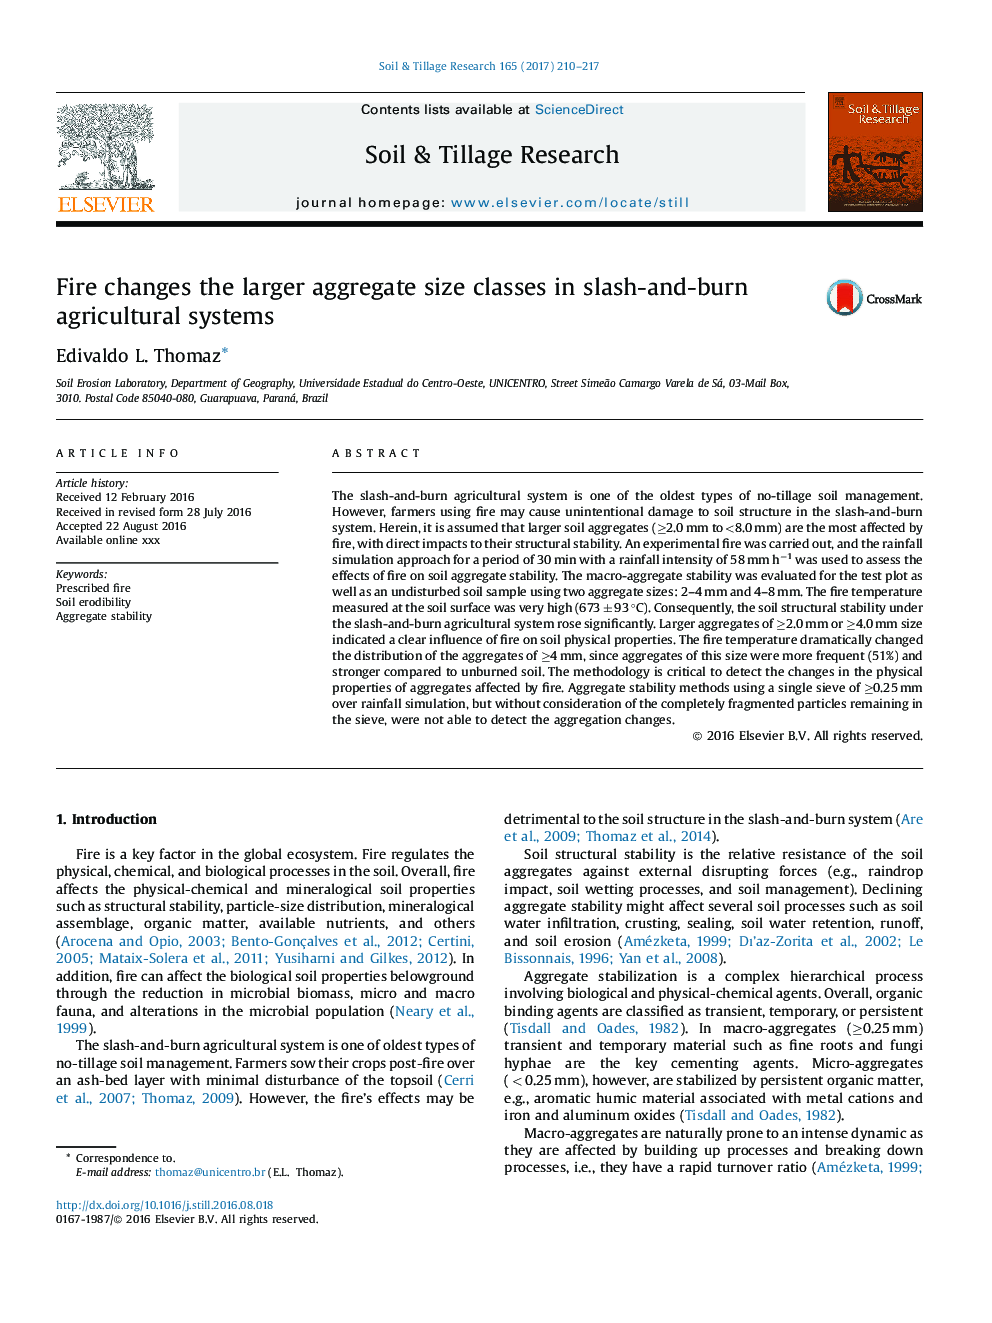 Fire changes the larger aggregate size classes in slash-and-burn agricultural systems